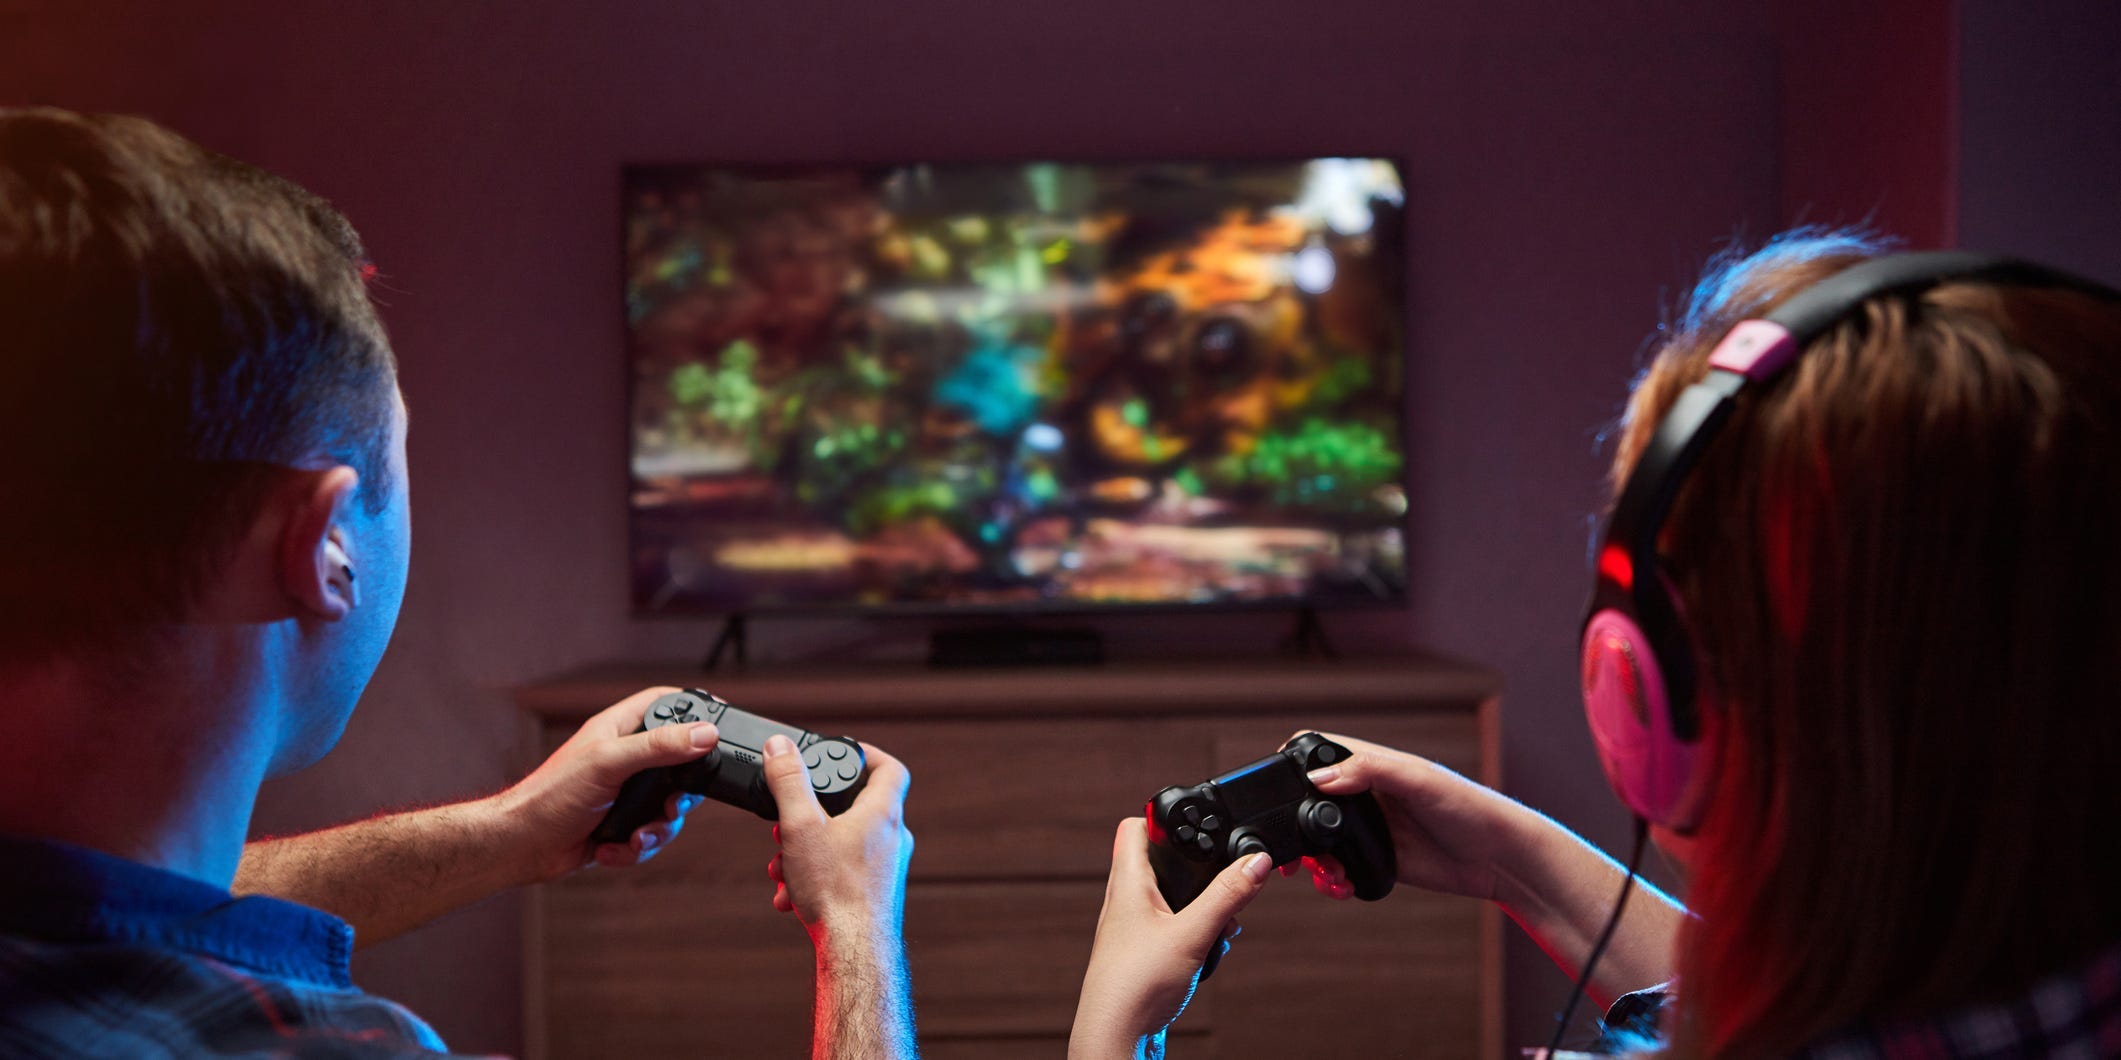 Two people playing PlayStation console